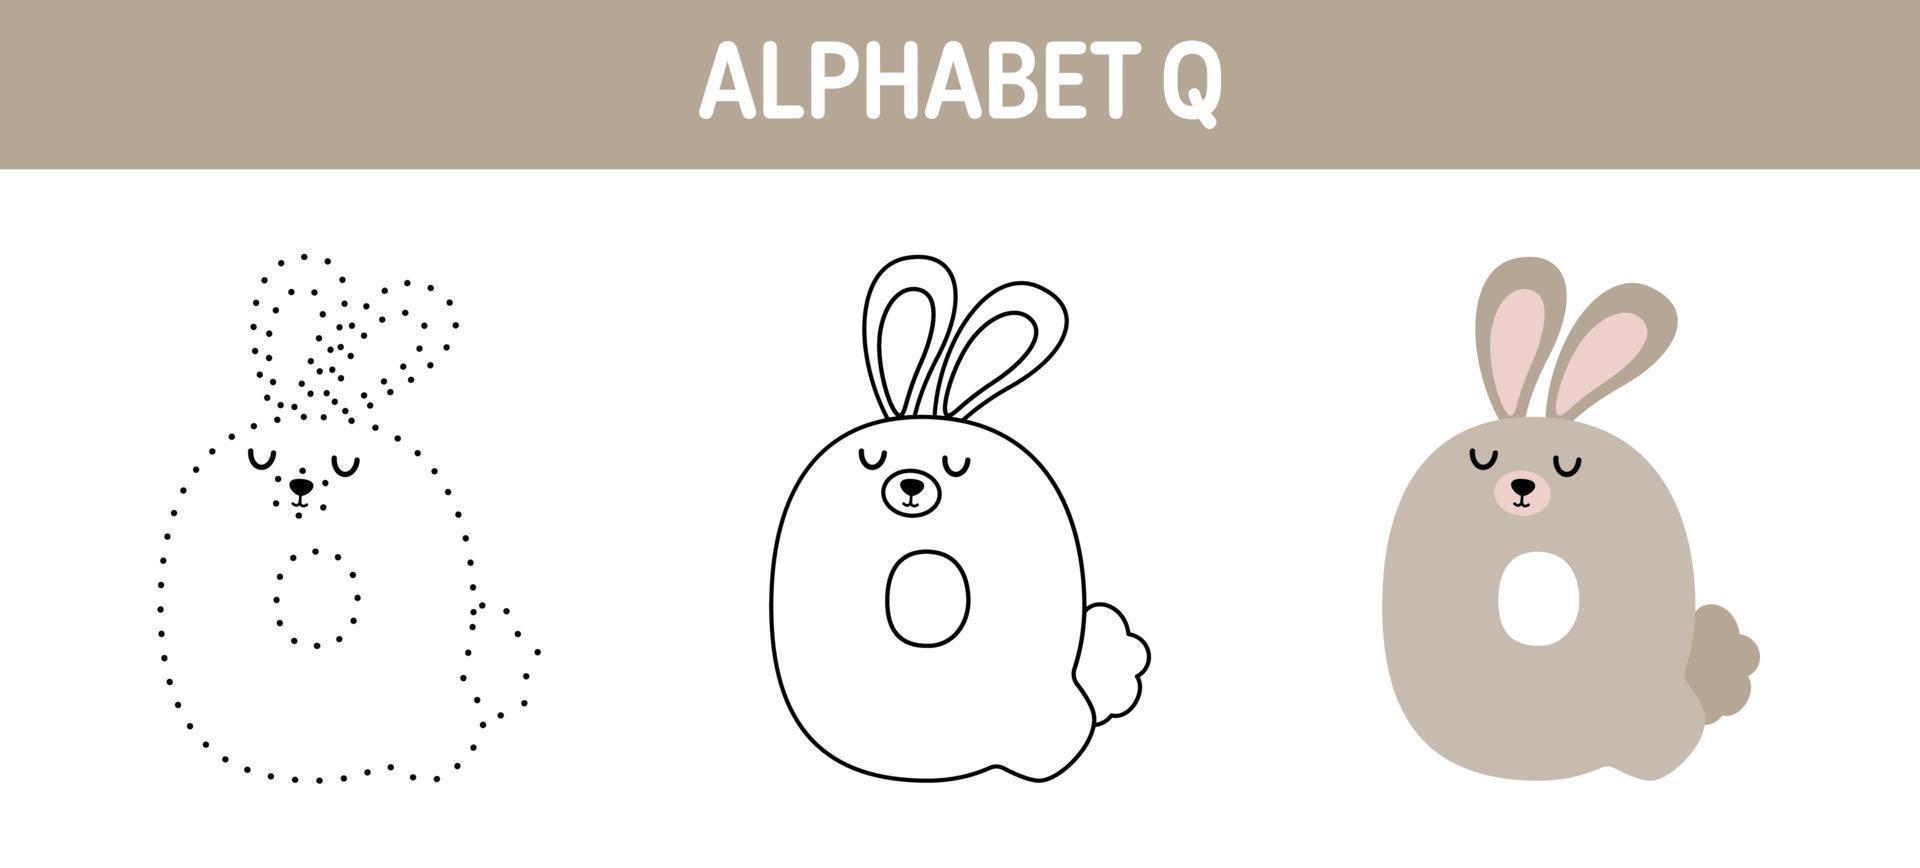 Alphabet Q tracing and coloring worksheet for kids vector